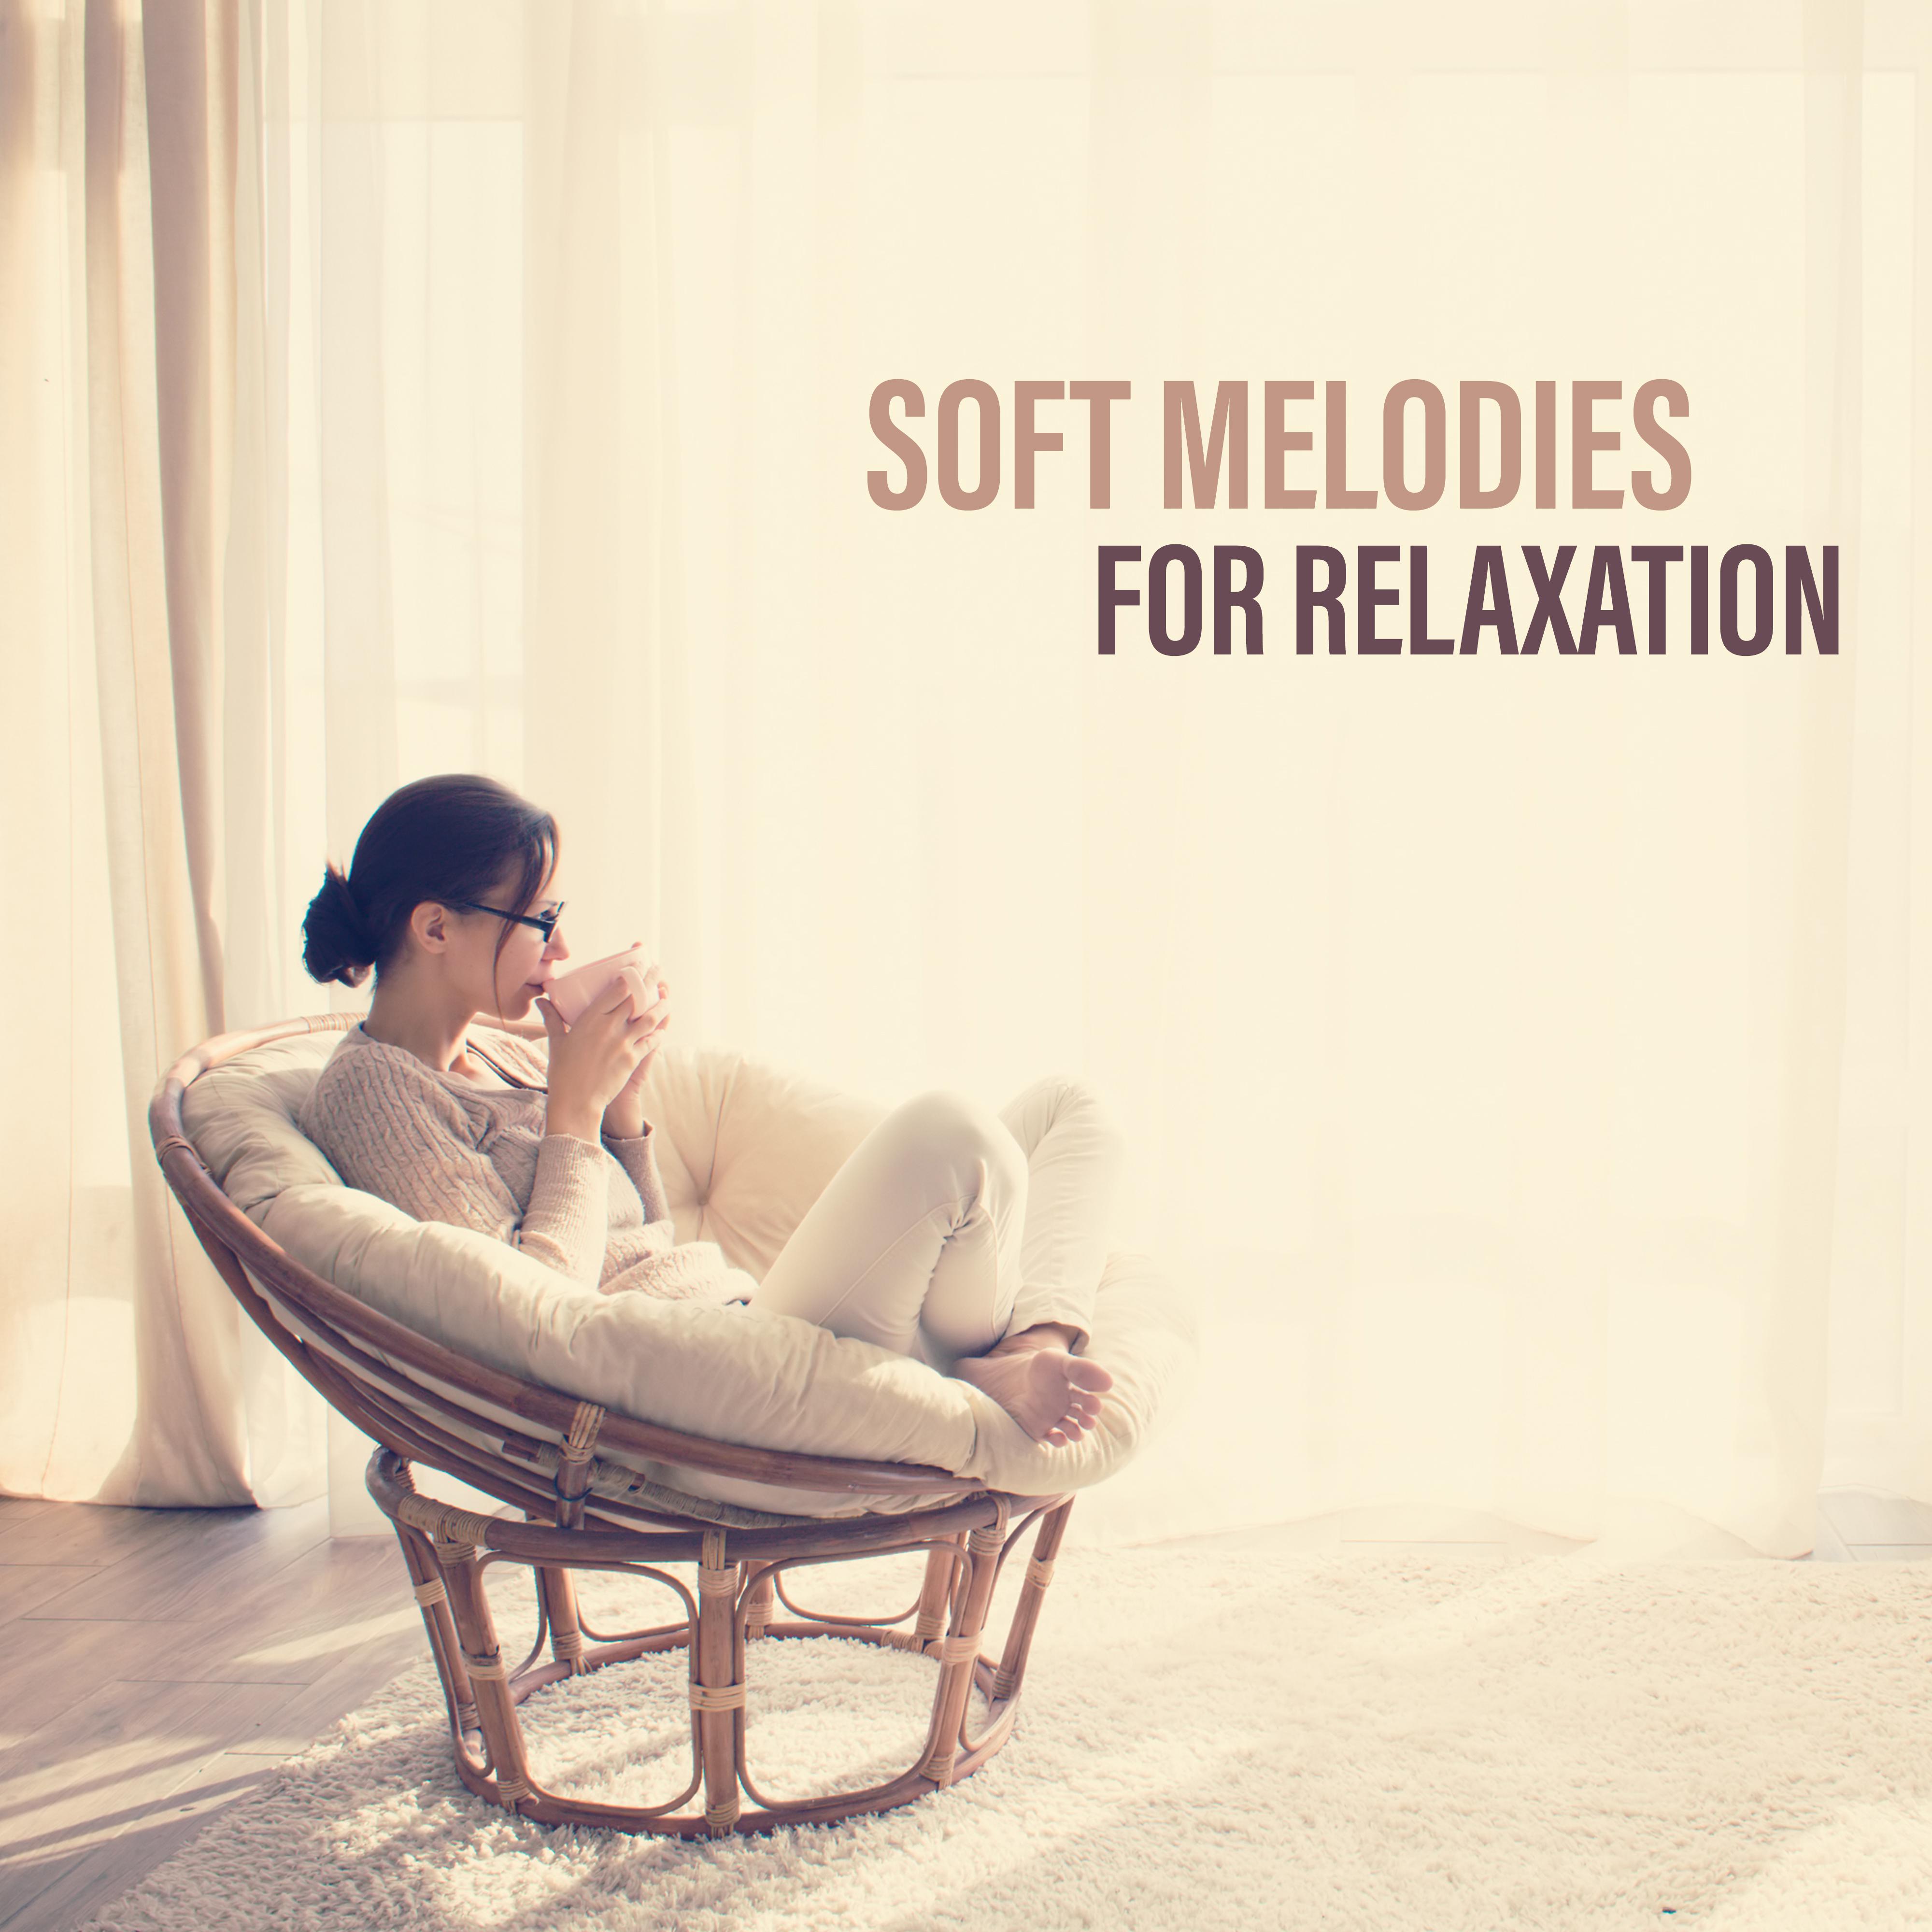 Soft Melodies for Relaxation